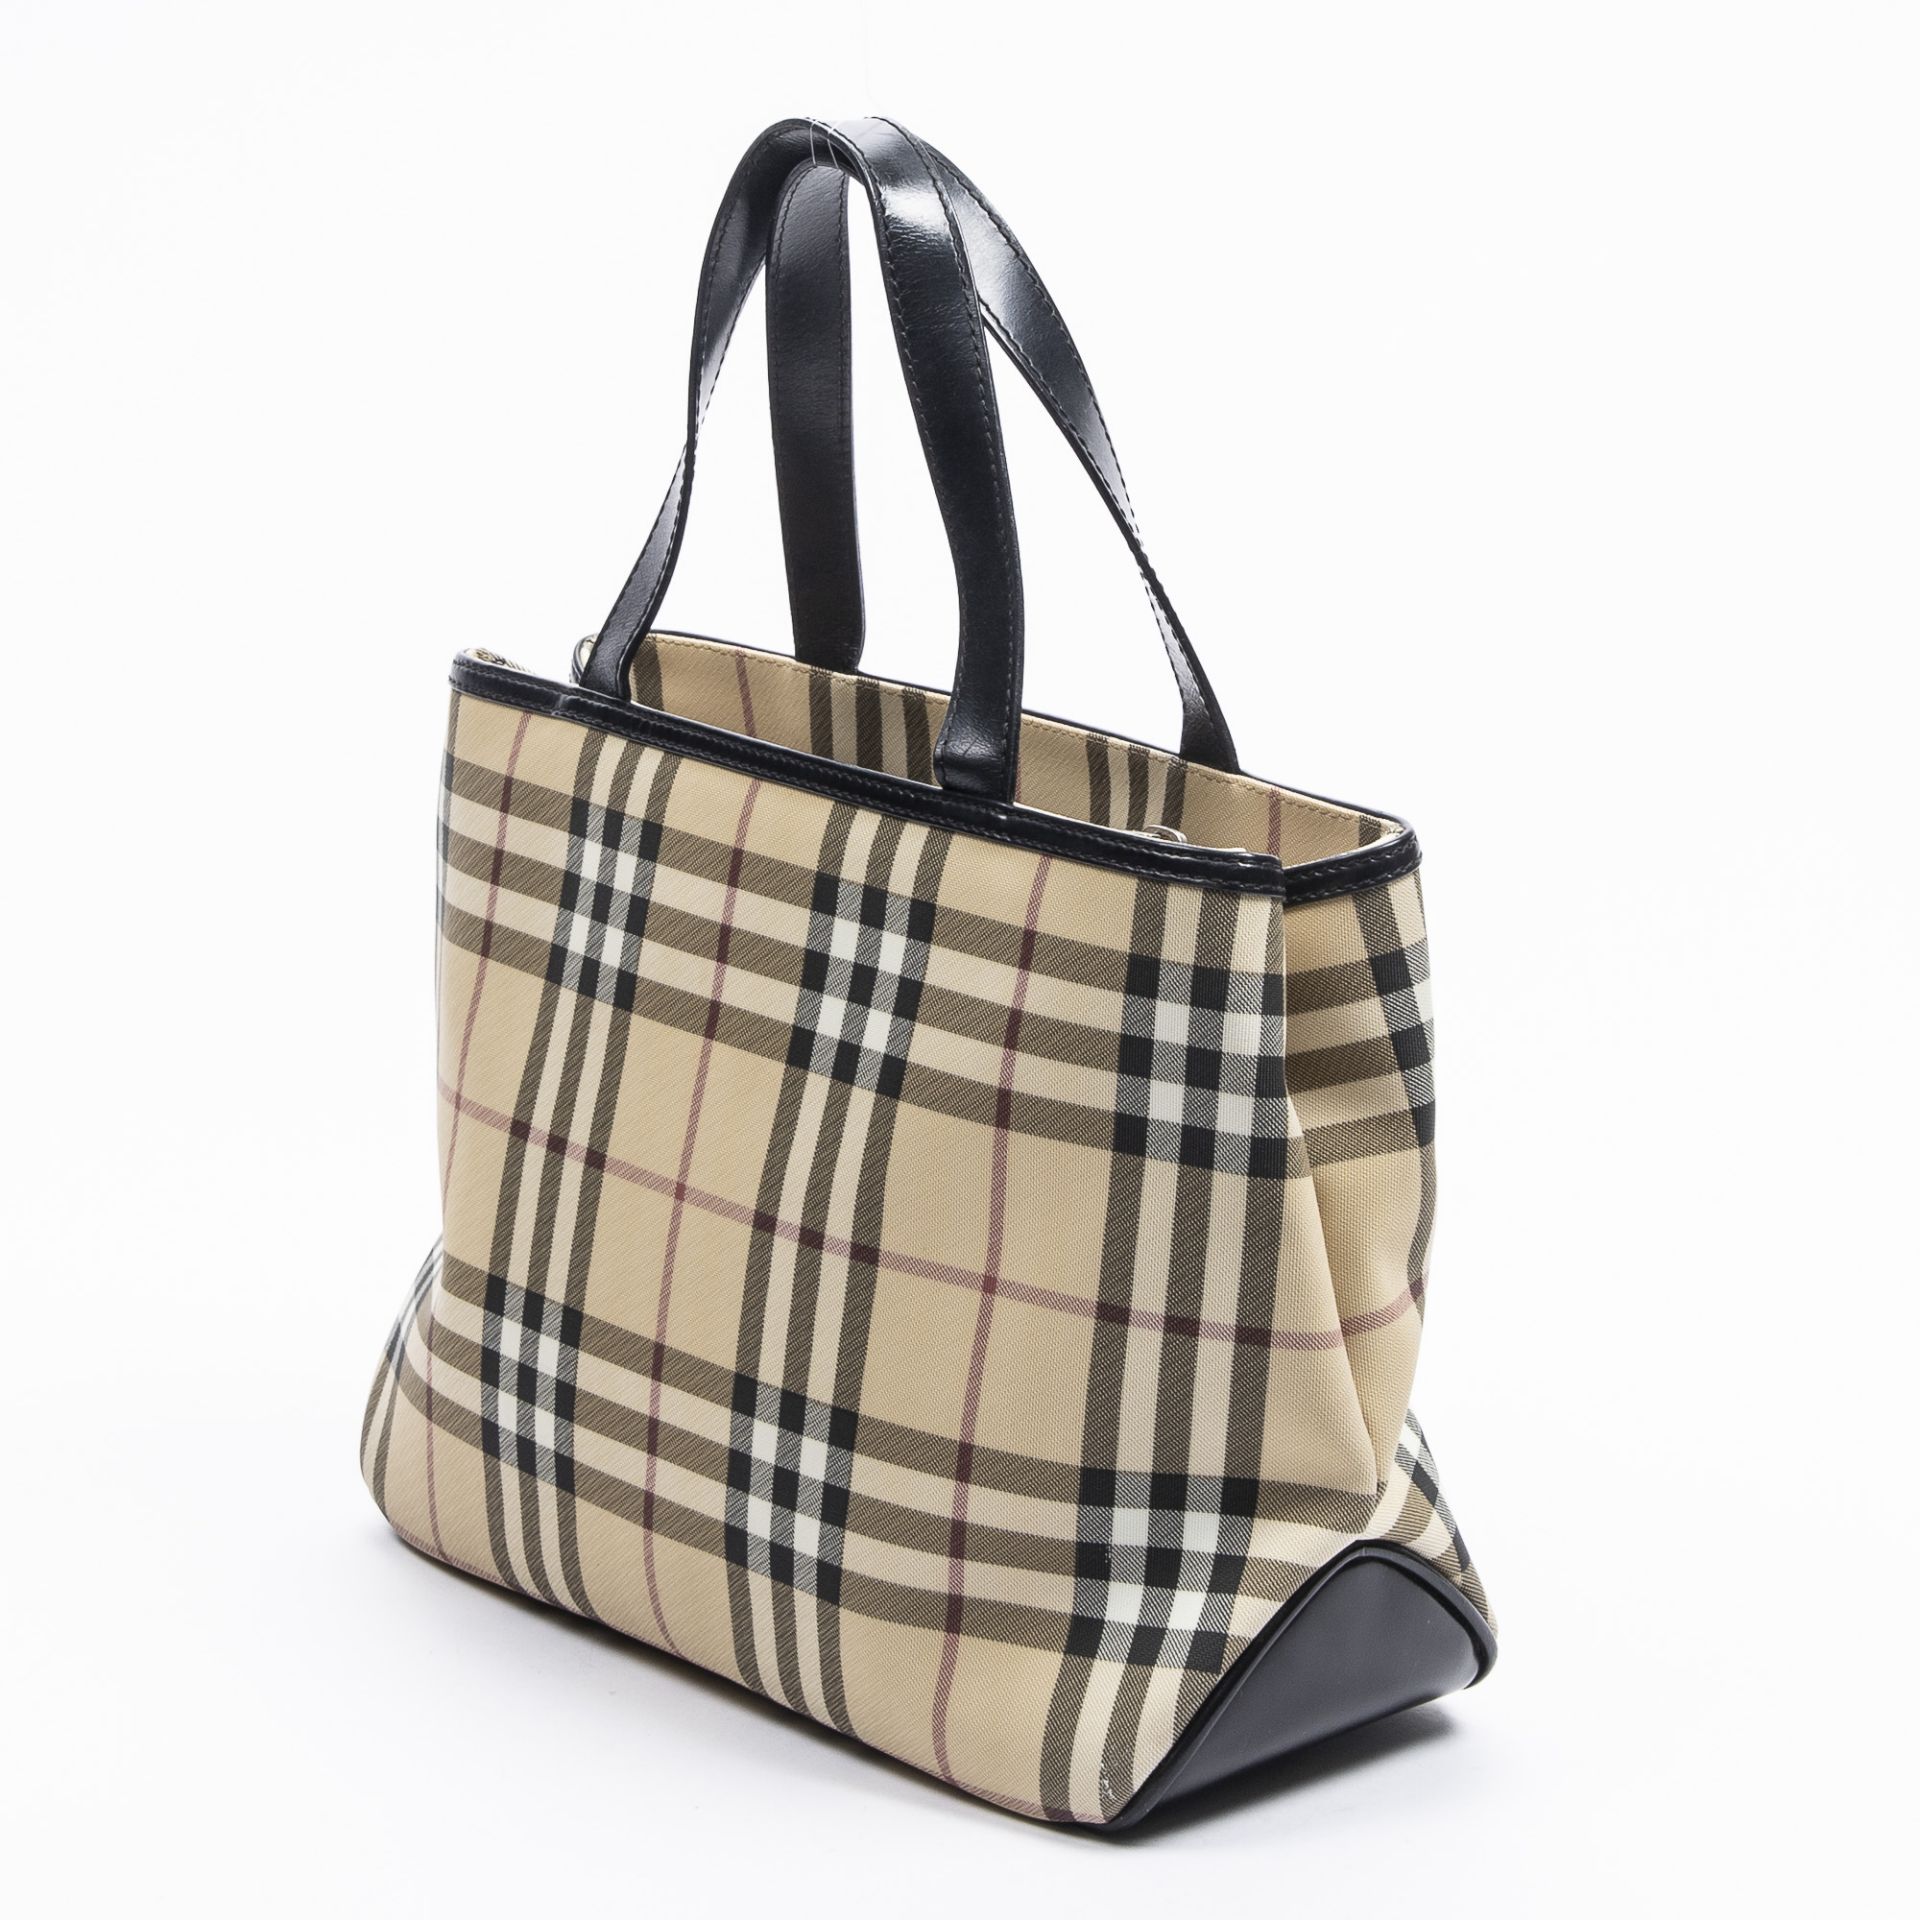 RRP £725.00 Lot To Contain 1 Burberry Coated Canvas Multi-Pocket Handbag In Beige/Black/White/ - Image 2 of 4